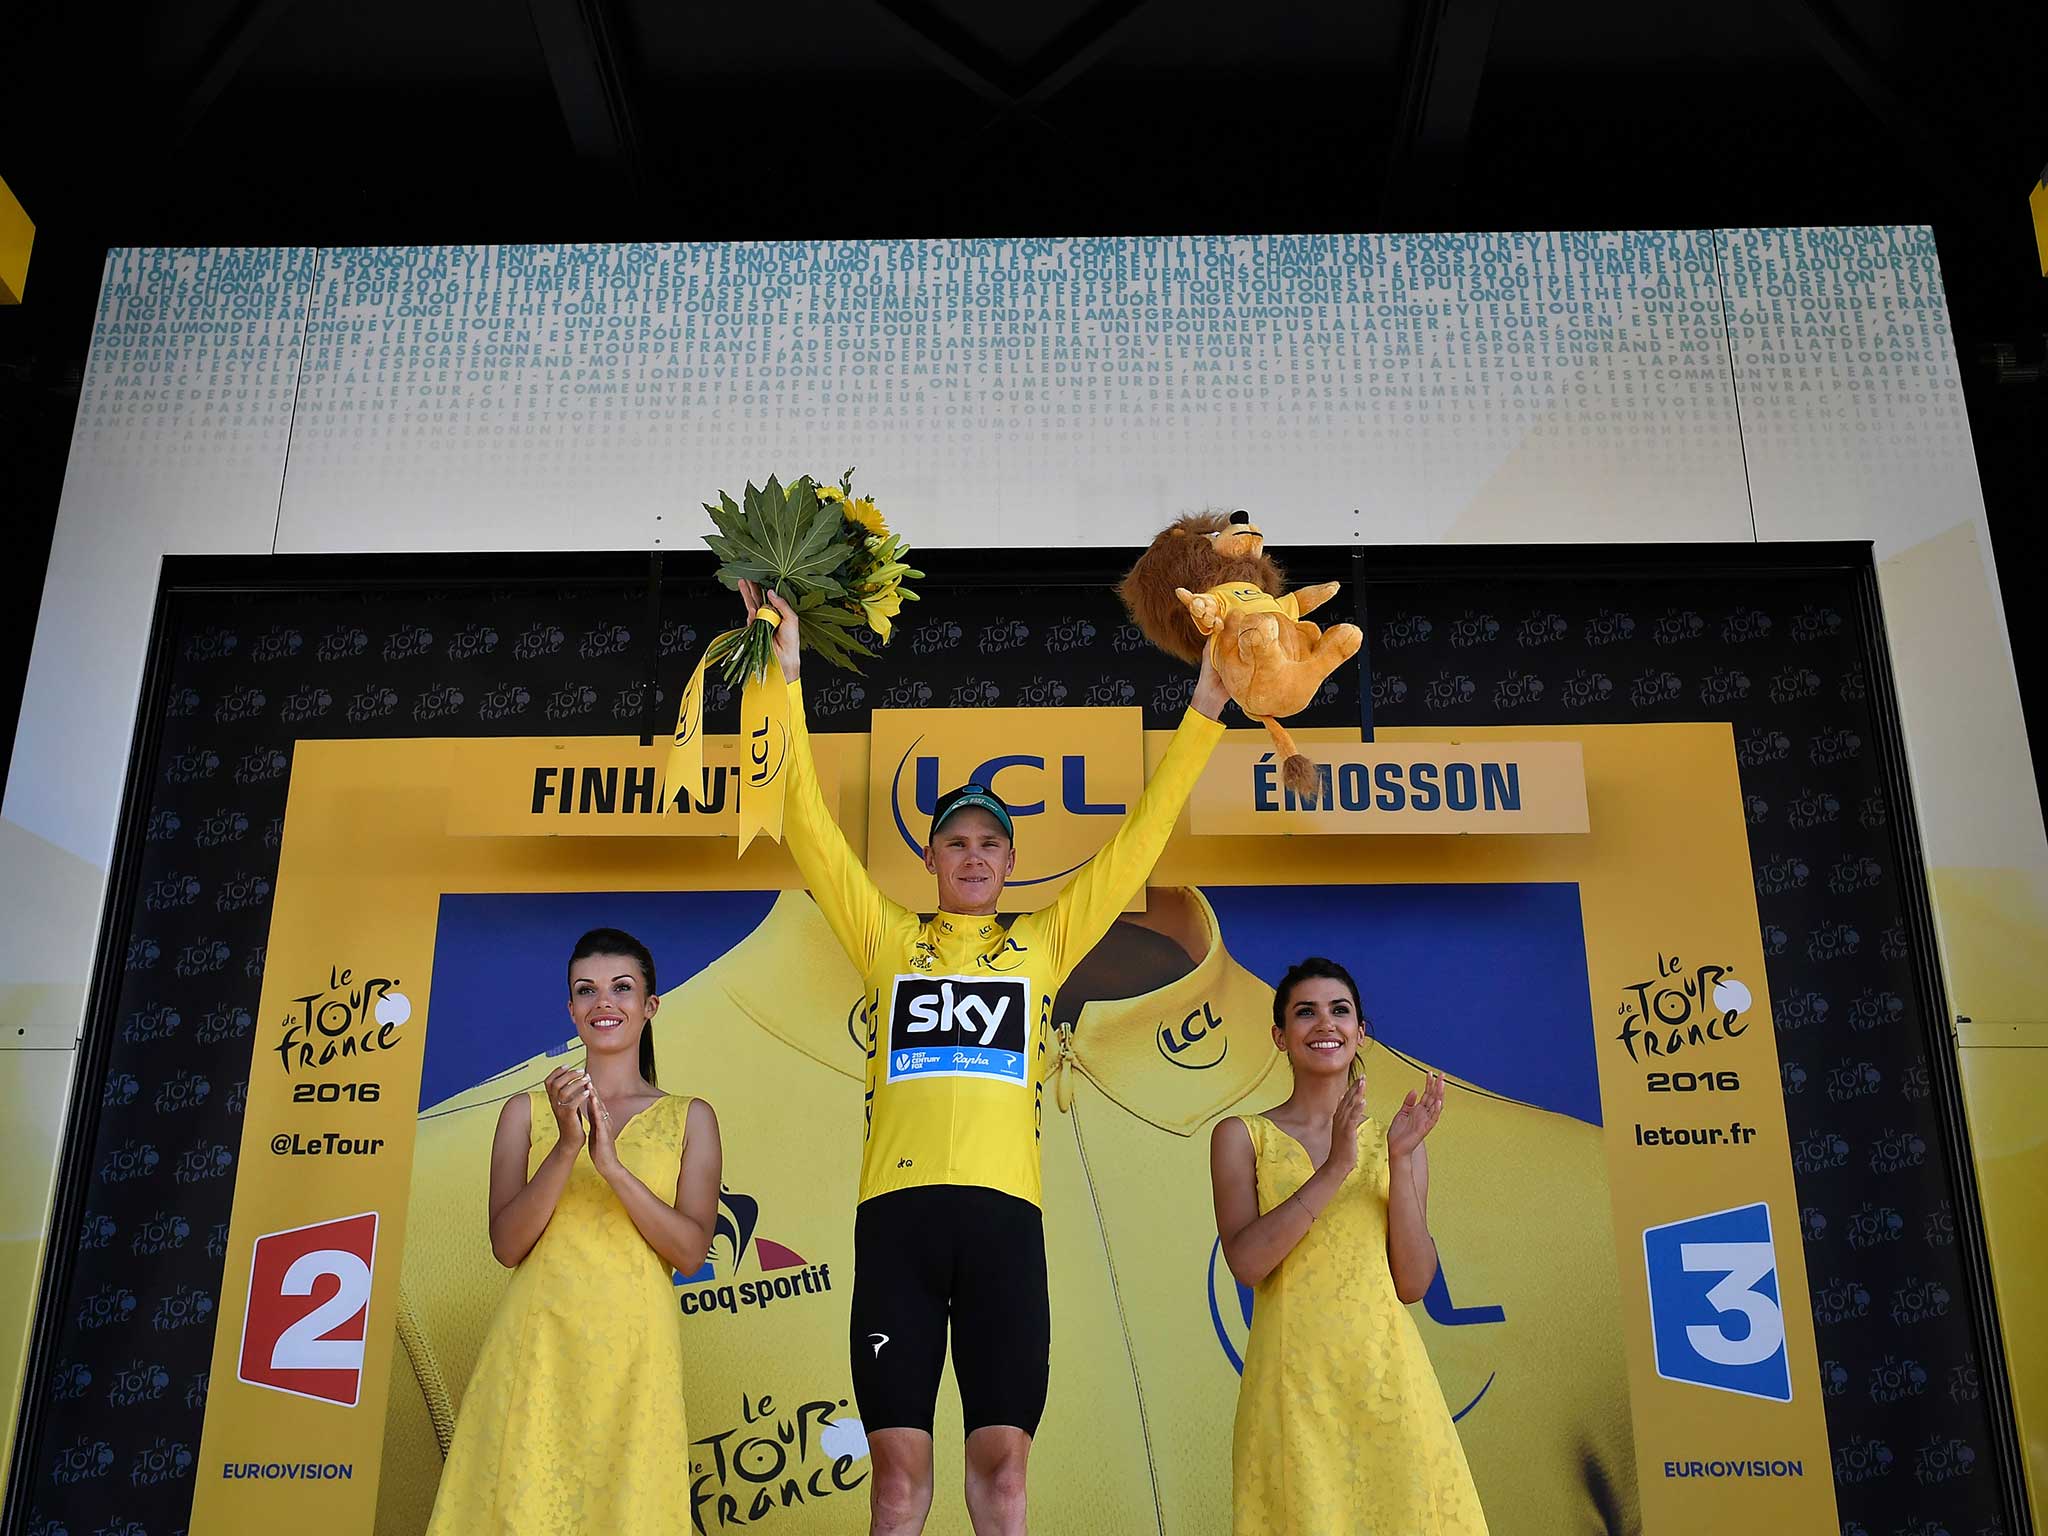 Chris Froome celebrates with the yellow jersey secure